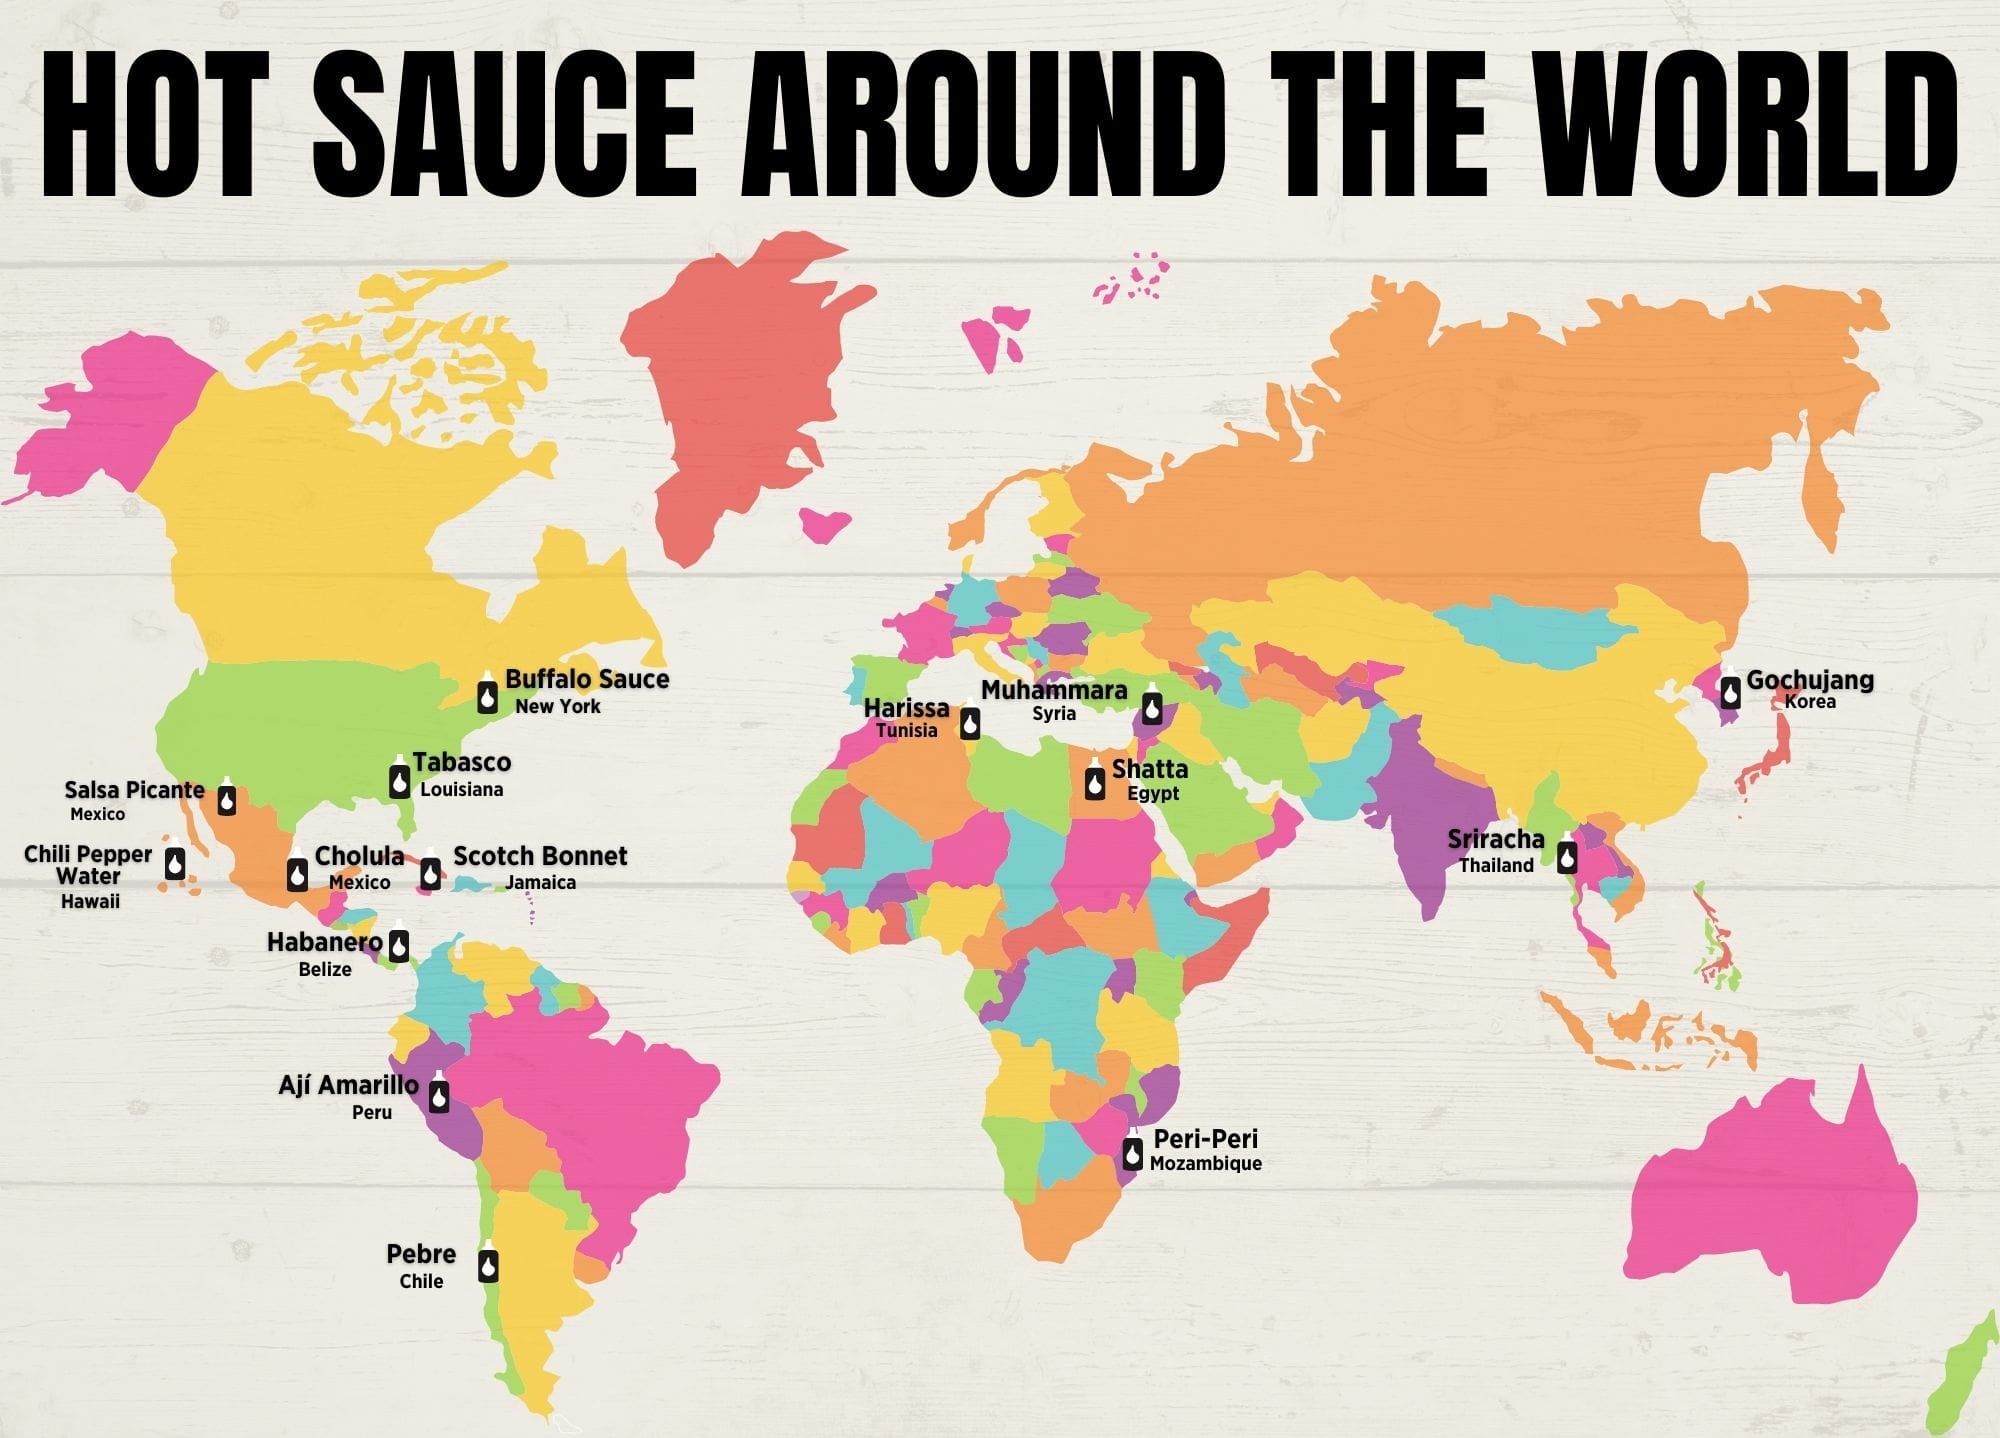 Hot Sauce from around the world map